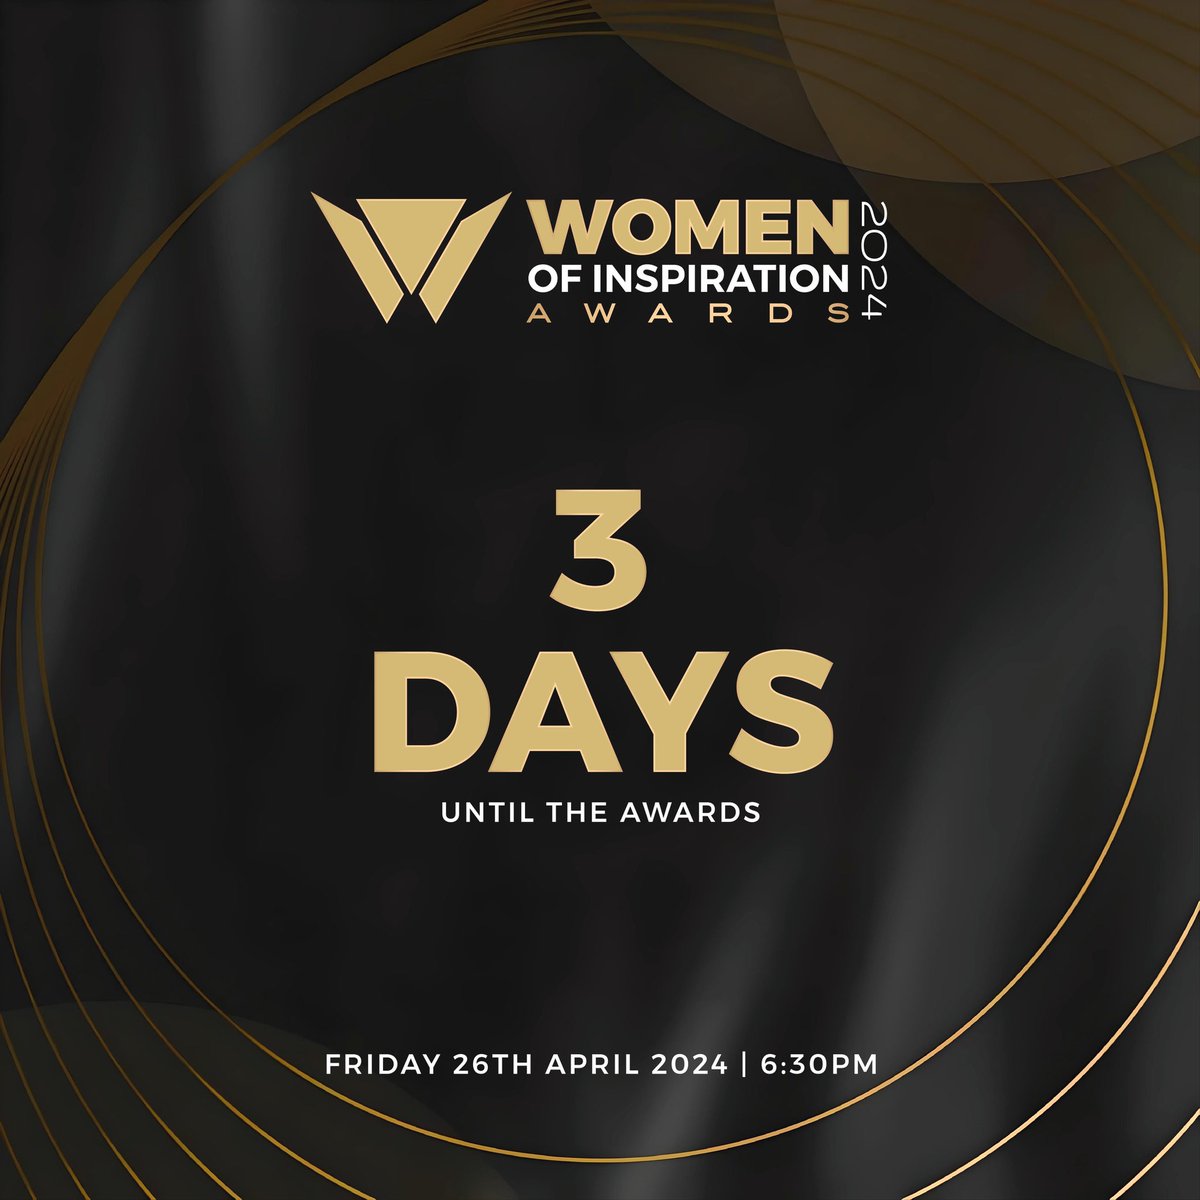 'Only 3 days left until the Women of Inspiration Awards! Can't wait to celebrate the amazing women who inspire us all. See you there! #WomenOfInspiration #Countdown'